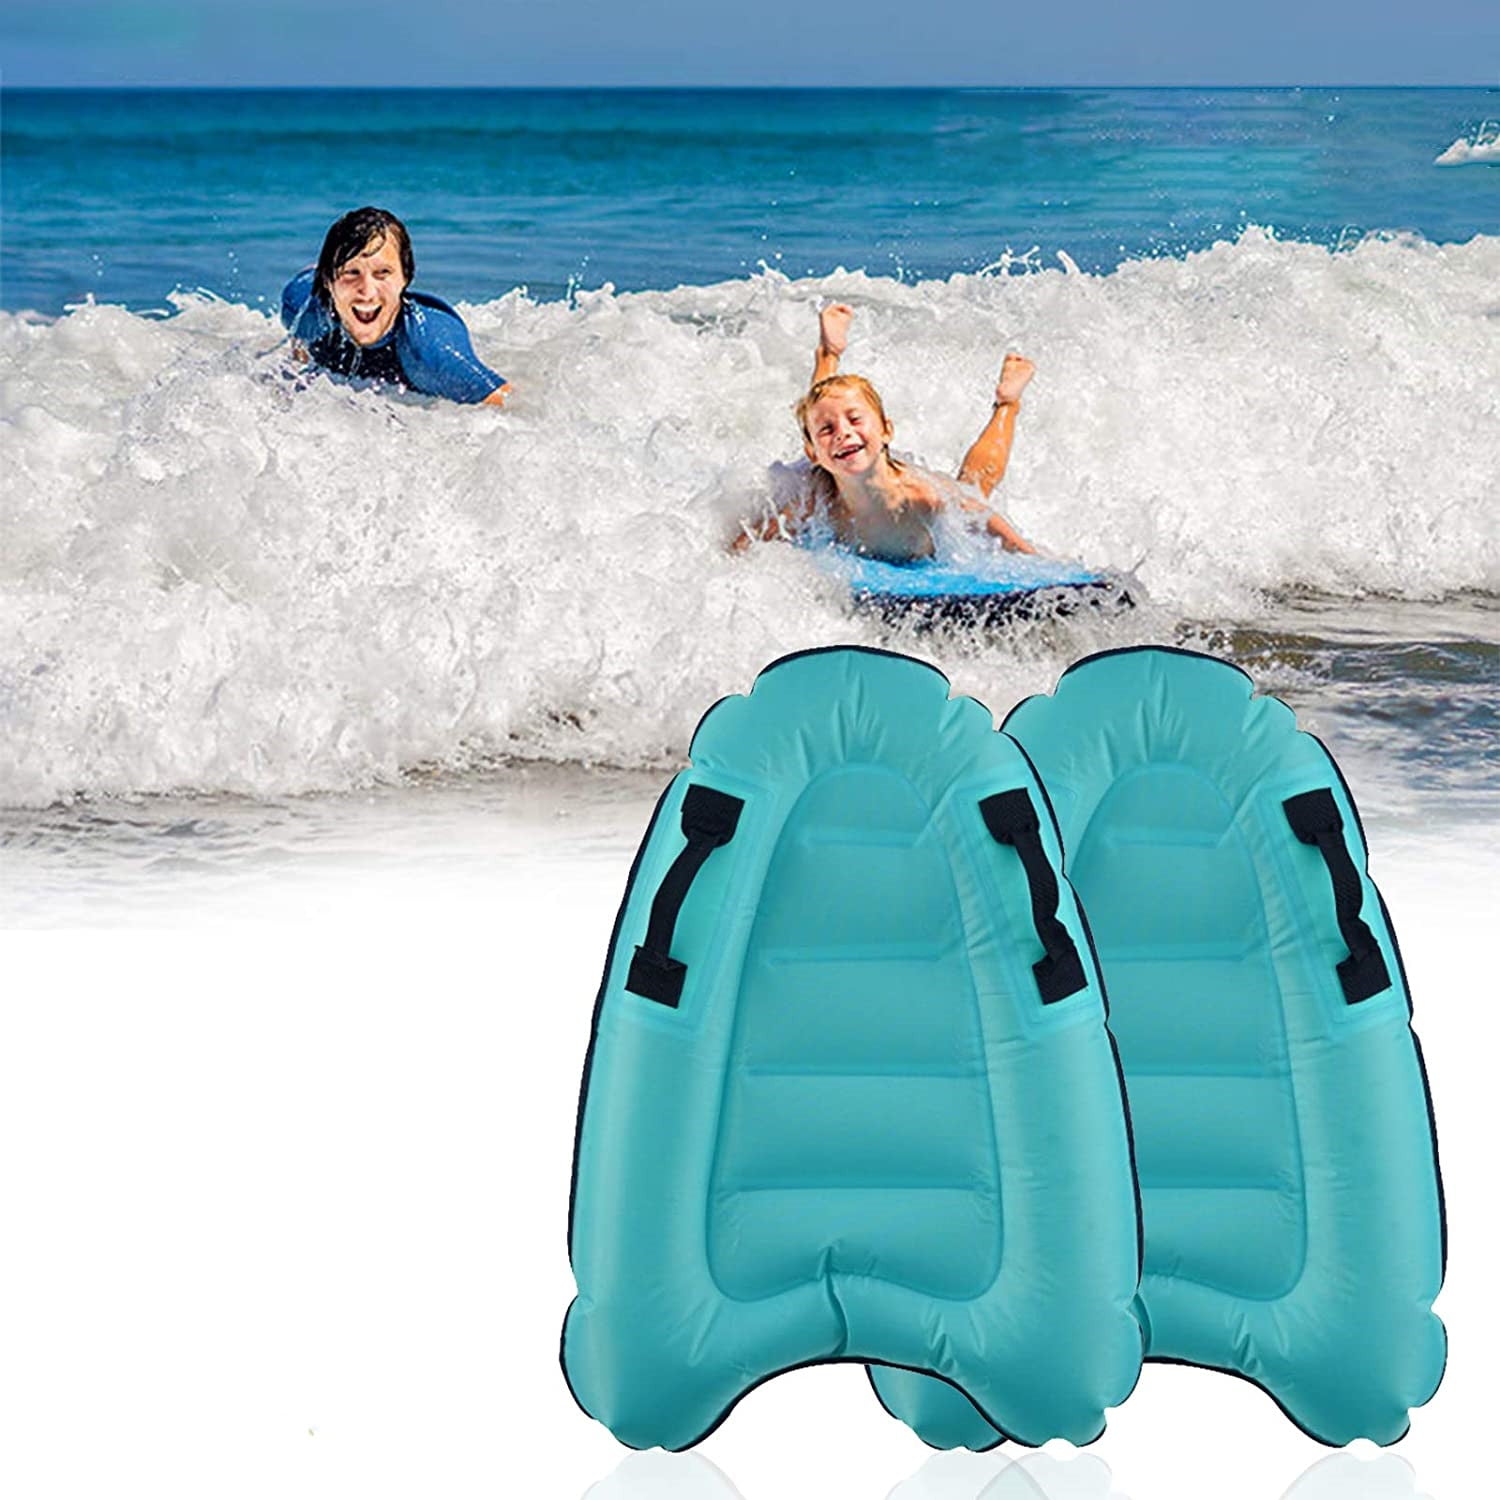 2PCS Inflatable Surfboard Portable Bodyboard with Handles Lightweight Soft Body Boards for Kids Surfboards Pool Floats Boards for Beach Swimming Surfing Water Fun